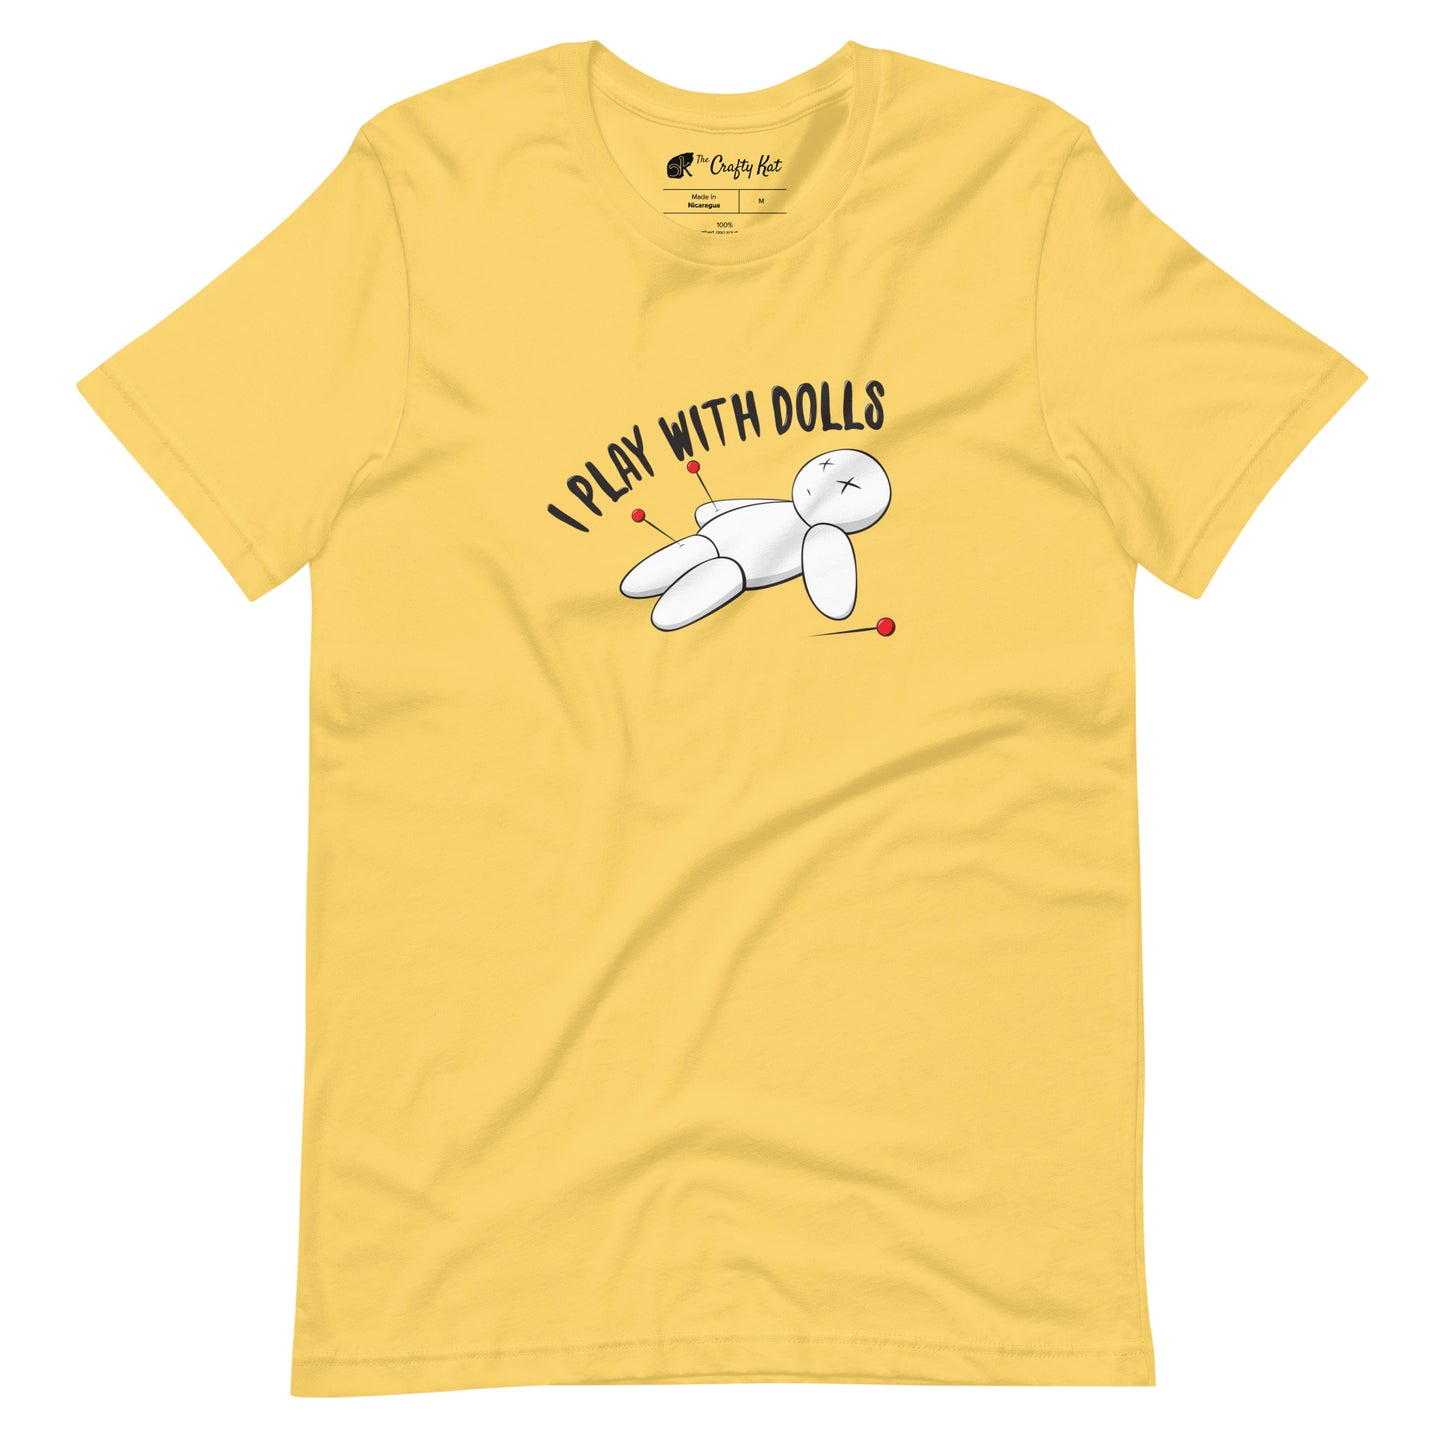 Yellow t-shirt with graphic of white voodoo doll with Xs for eyes stuck with several pins and text "I PLAY WITH DOLLS"